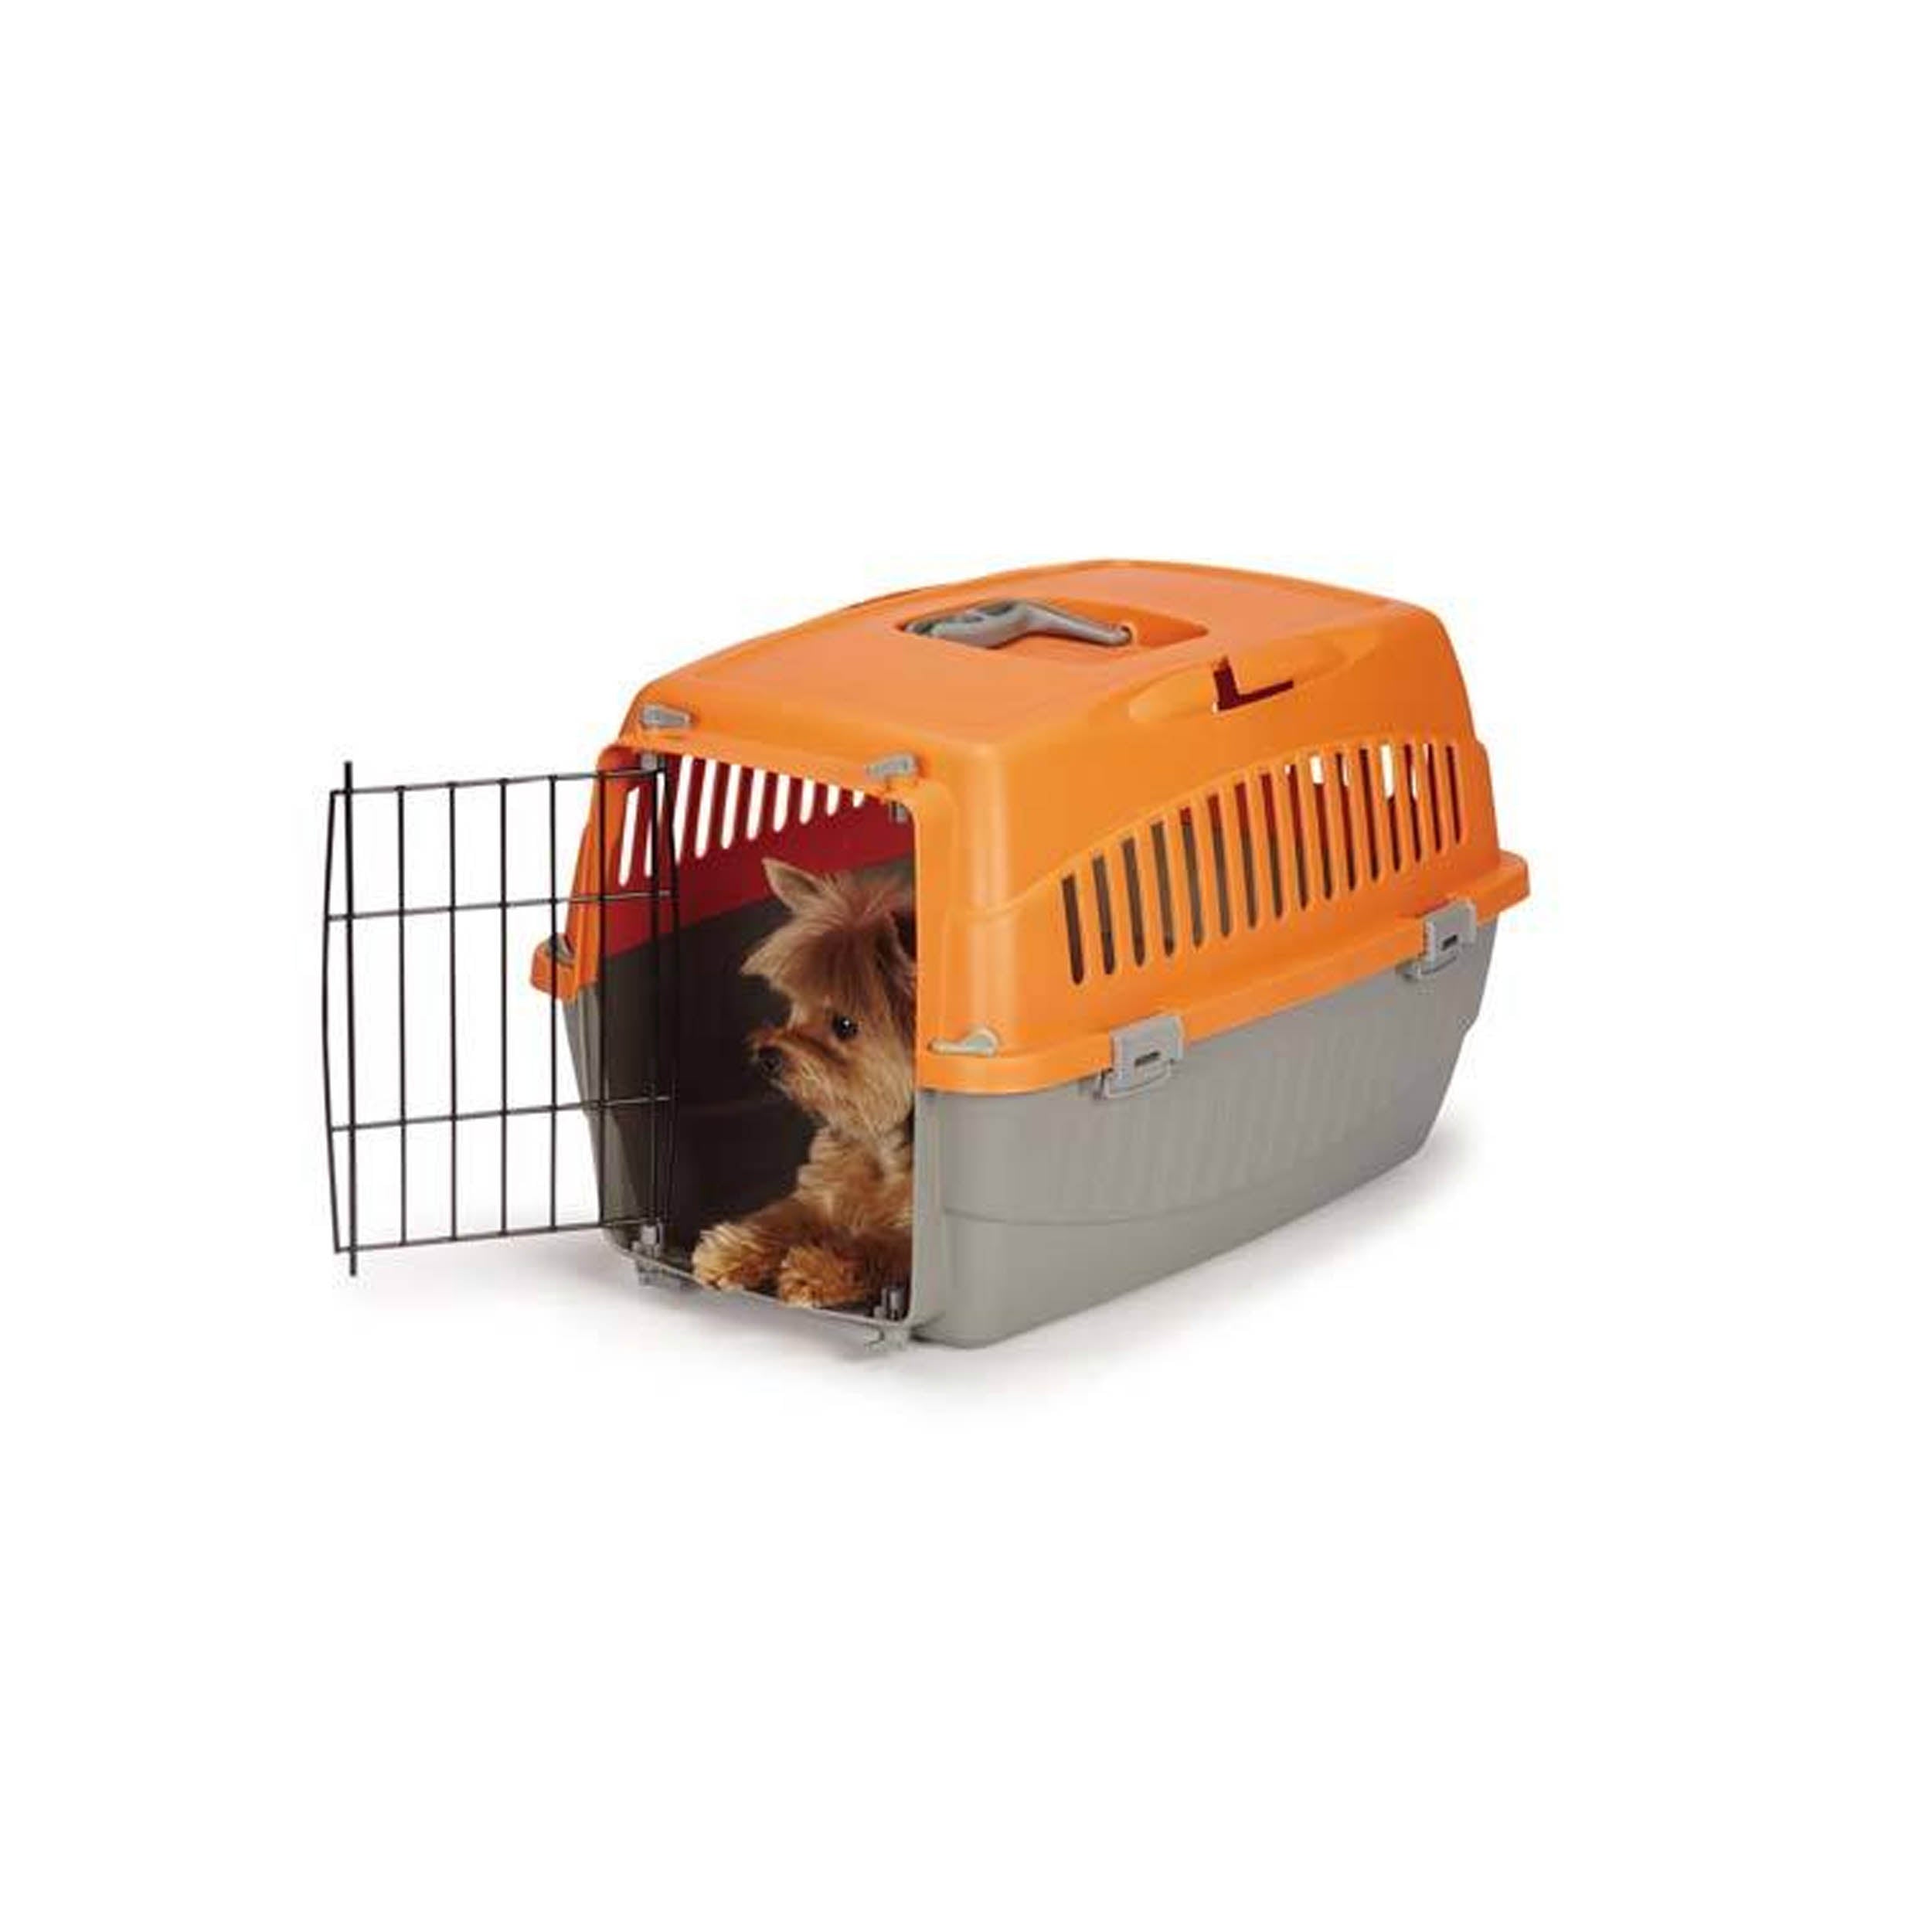 Cruising Companion Carry Me Pet Crate variety Of colors Pink, Orange, Green, Blue with grey base. Crate is extra comfortable and perfectly beathable. Intended use for travel, vet visits, or car rides. Sizes vary in only small and medium. Image Model Yorkshire Terrier inside small orange crate 